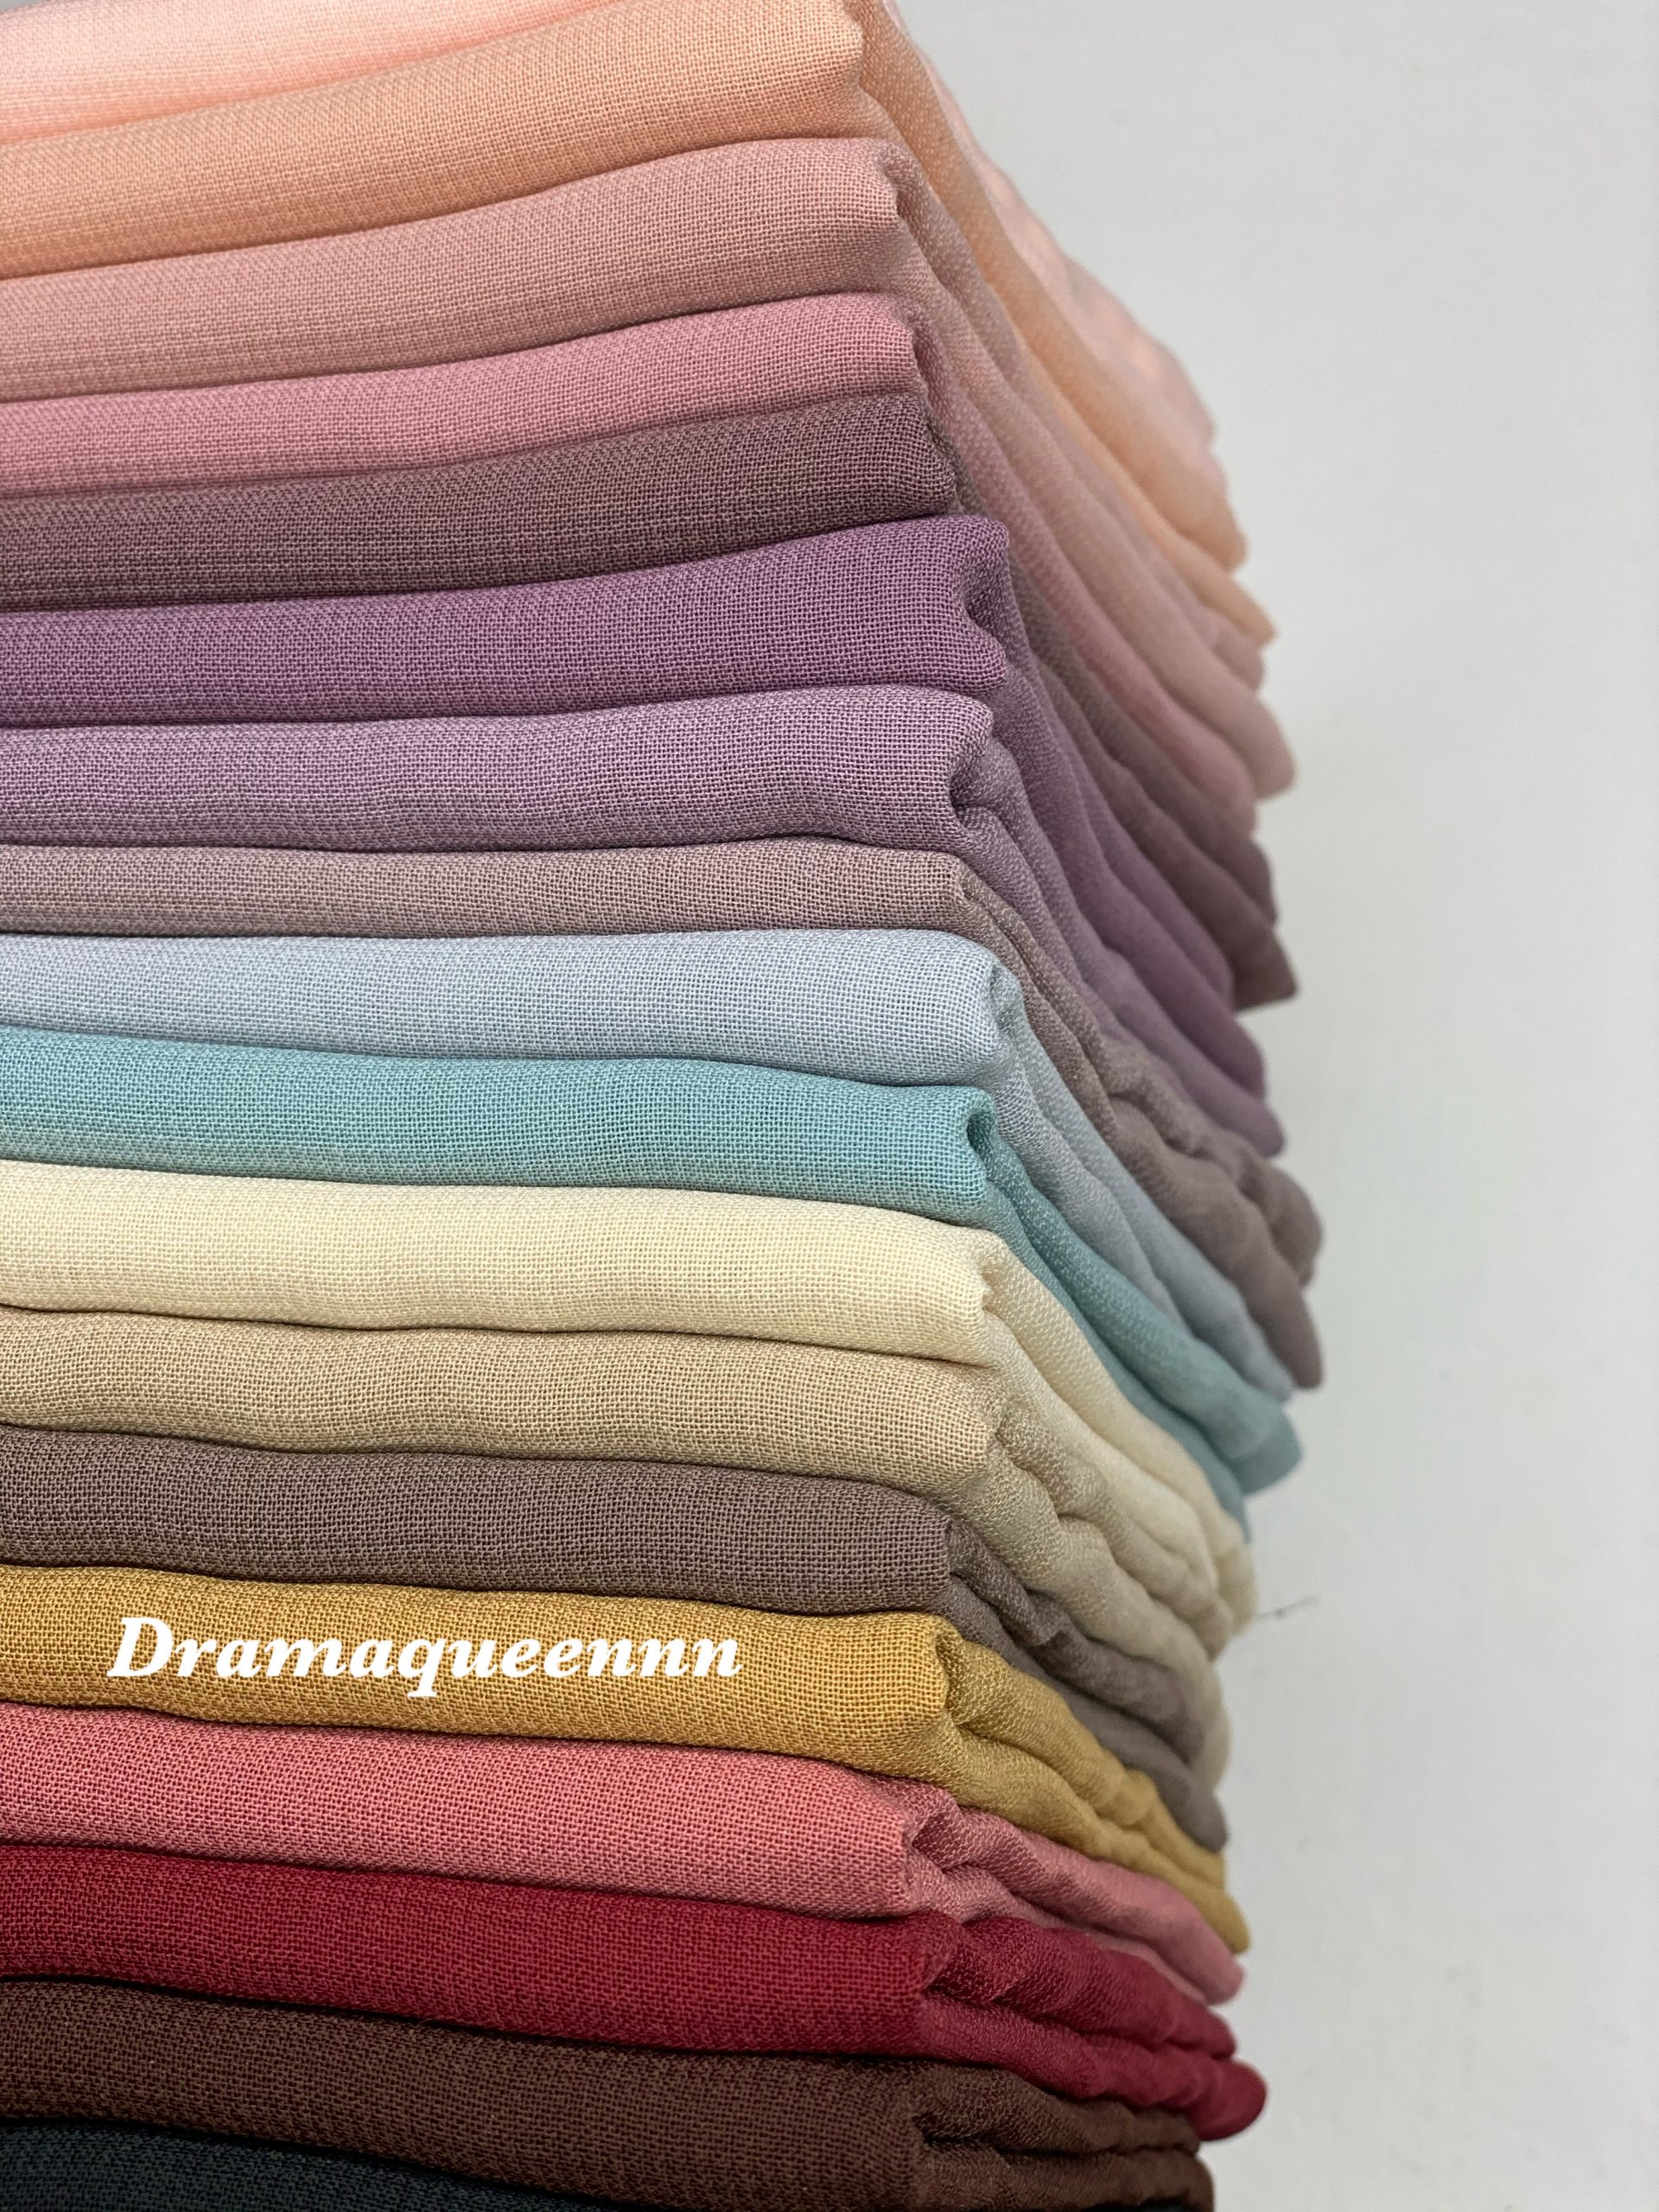 Chiffon voile bawal Category not